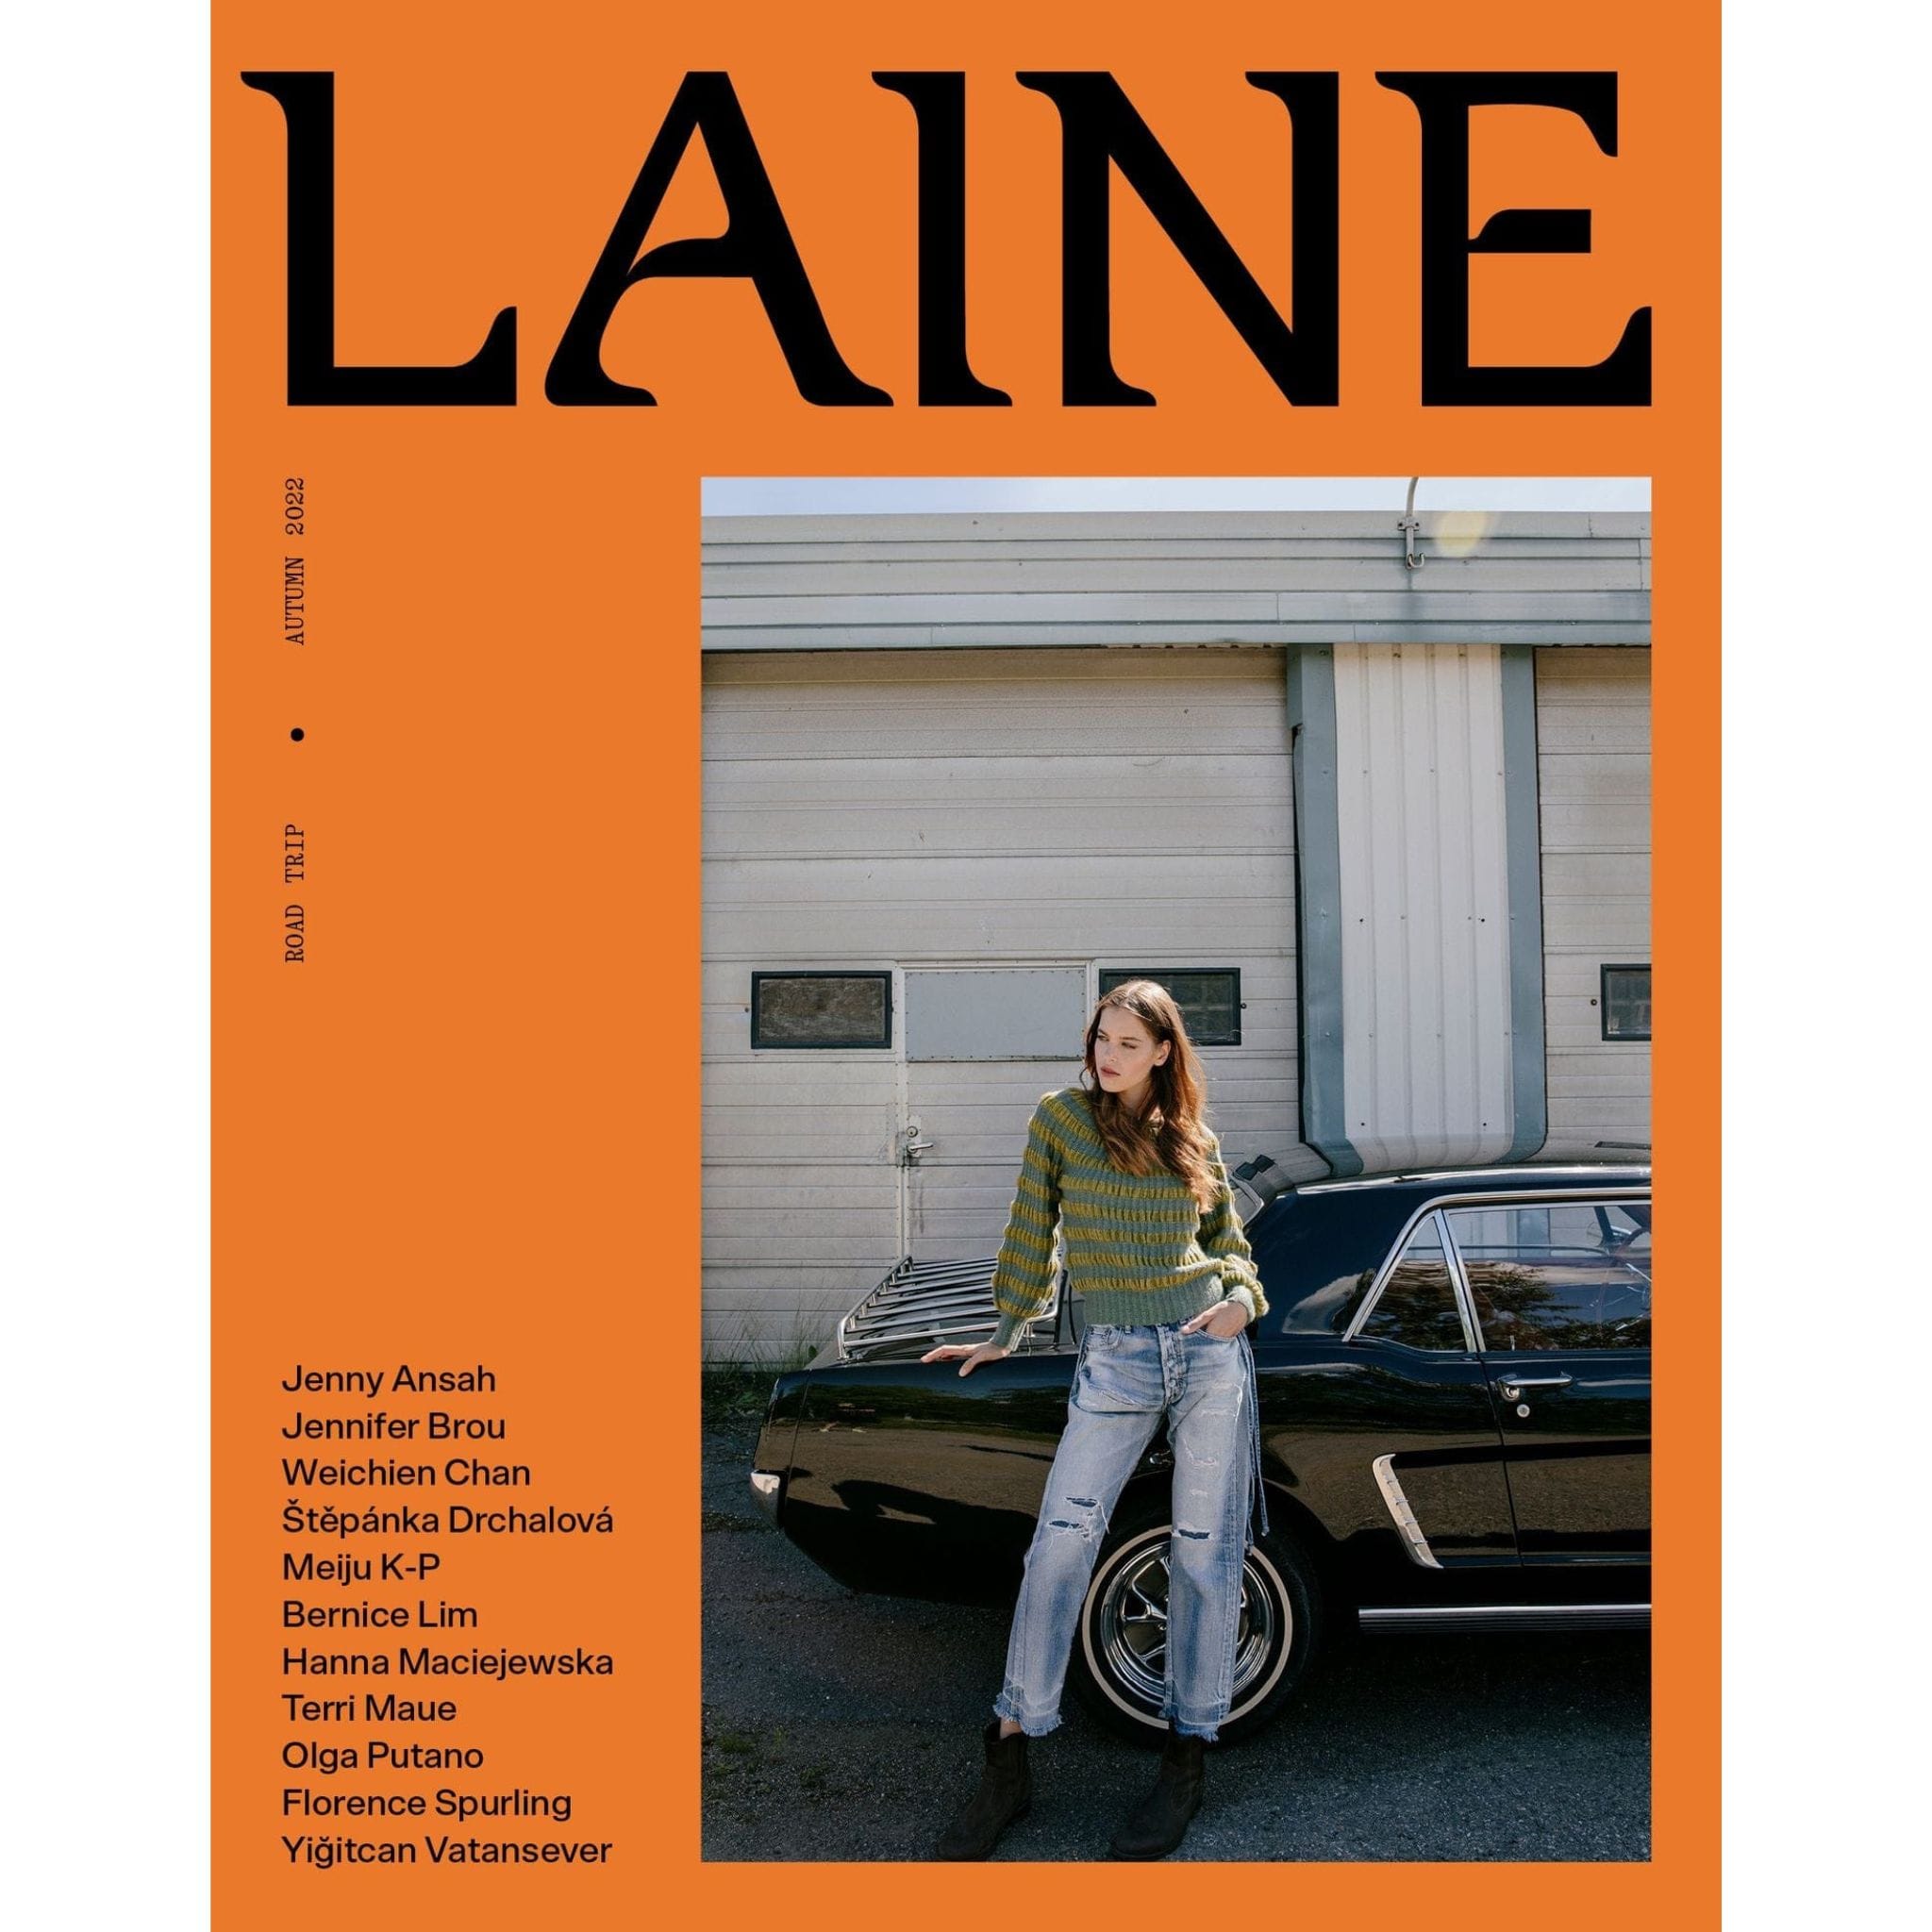 Cover of Laine Magazine Issue 15 Autumn 2022 Orange Cover with woman standing in front of car with jeans and sweater.